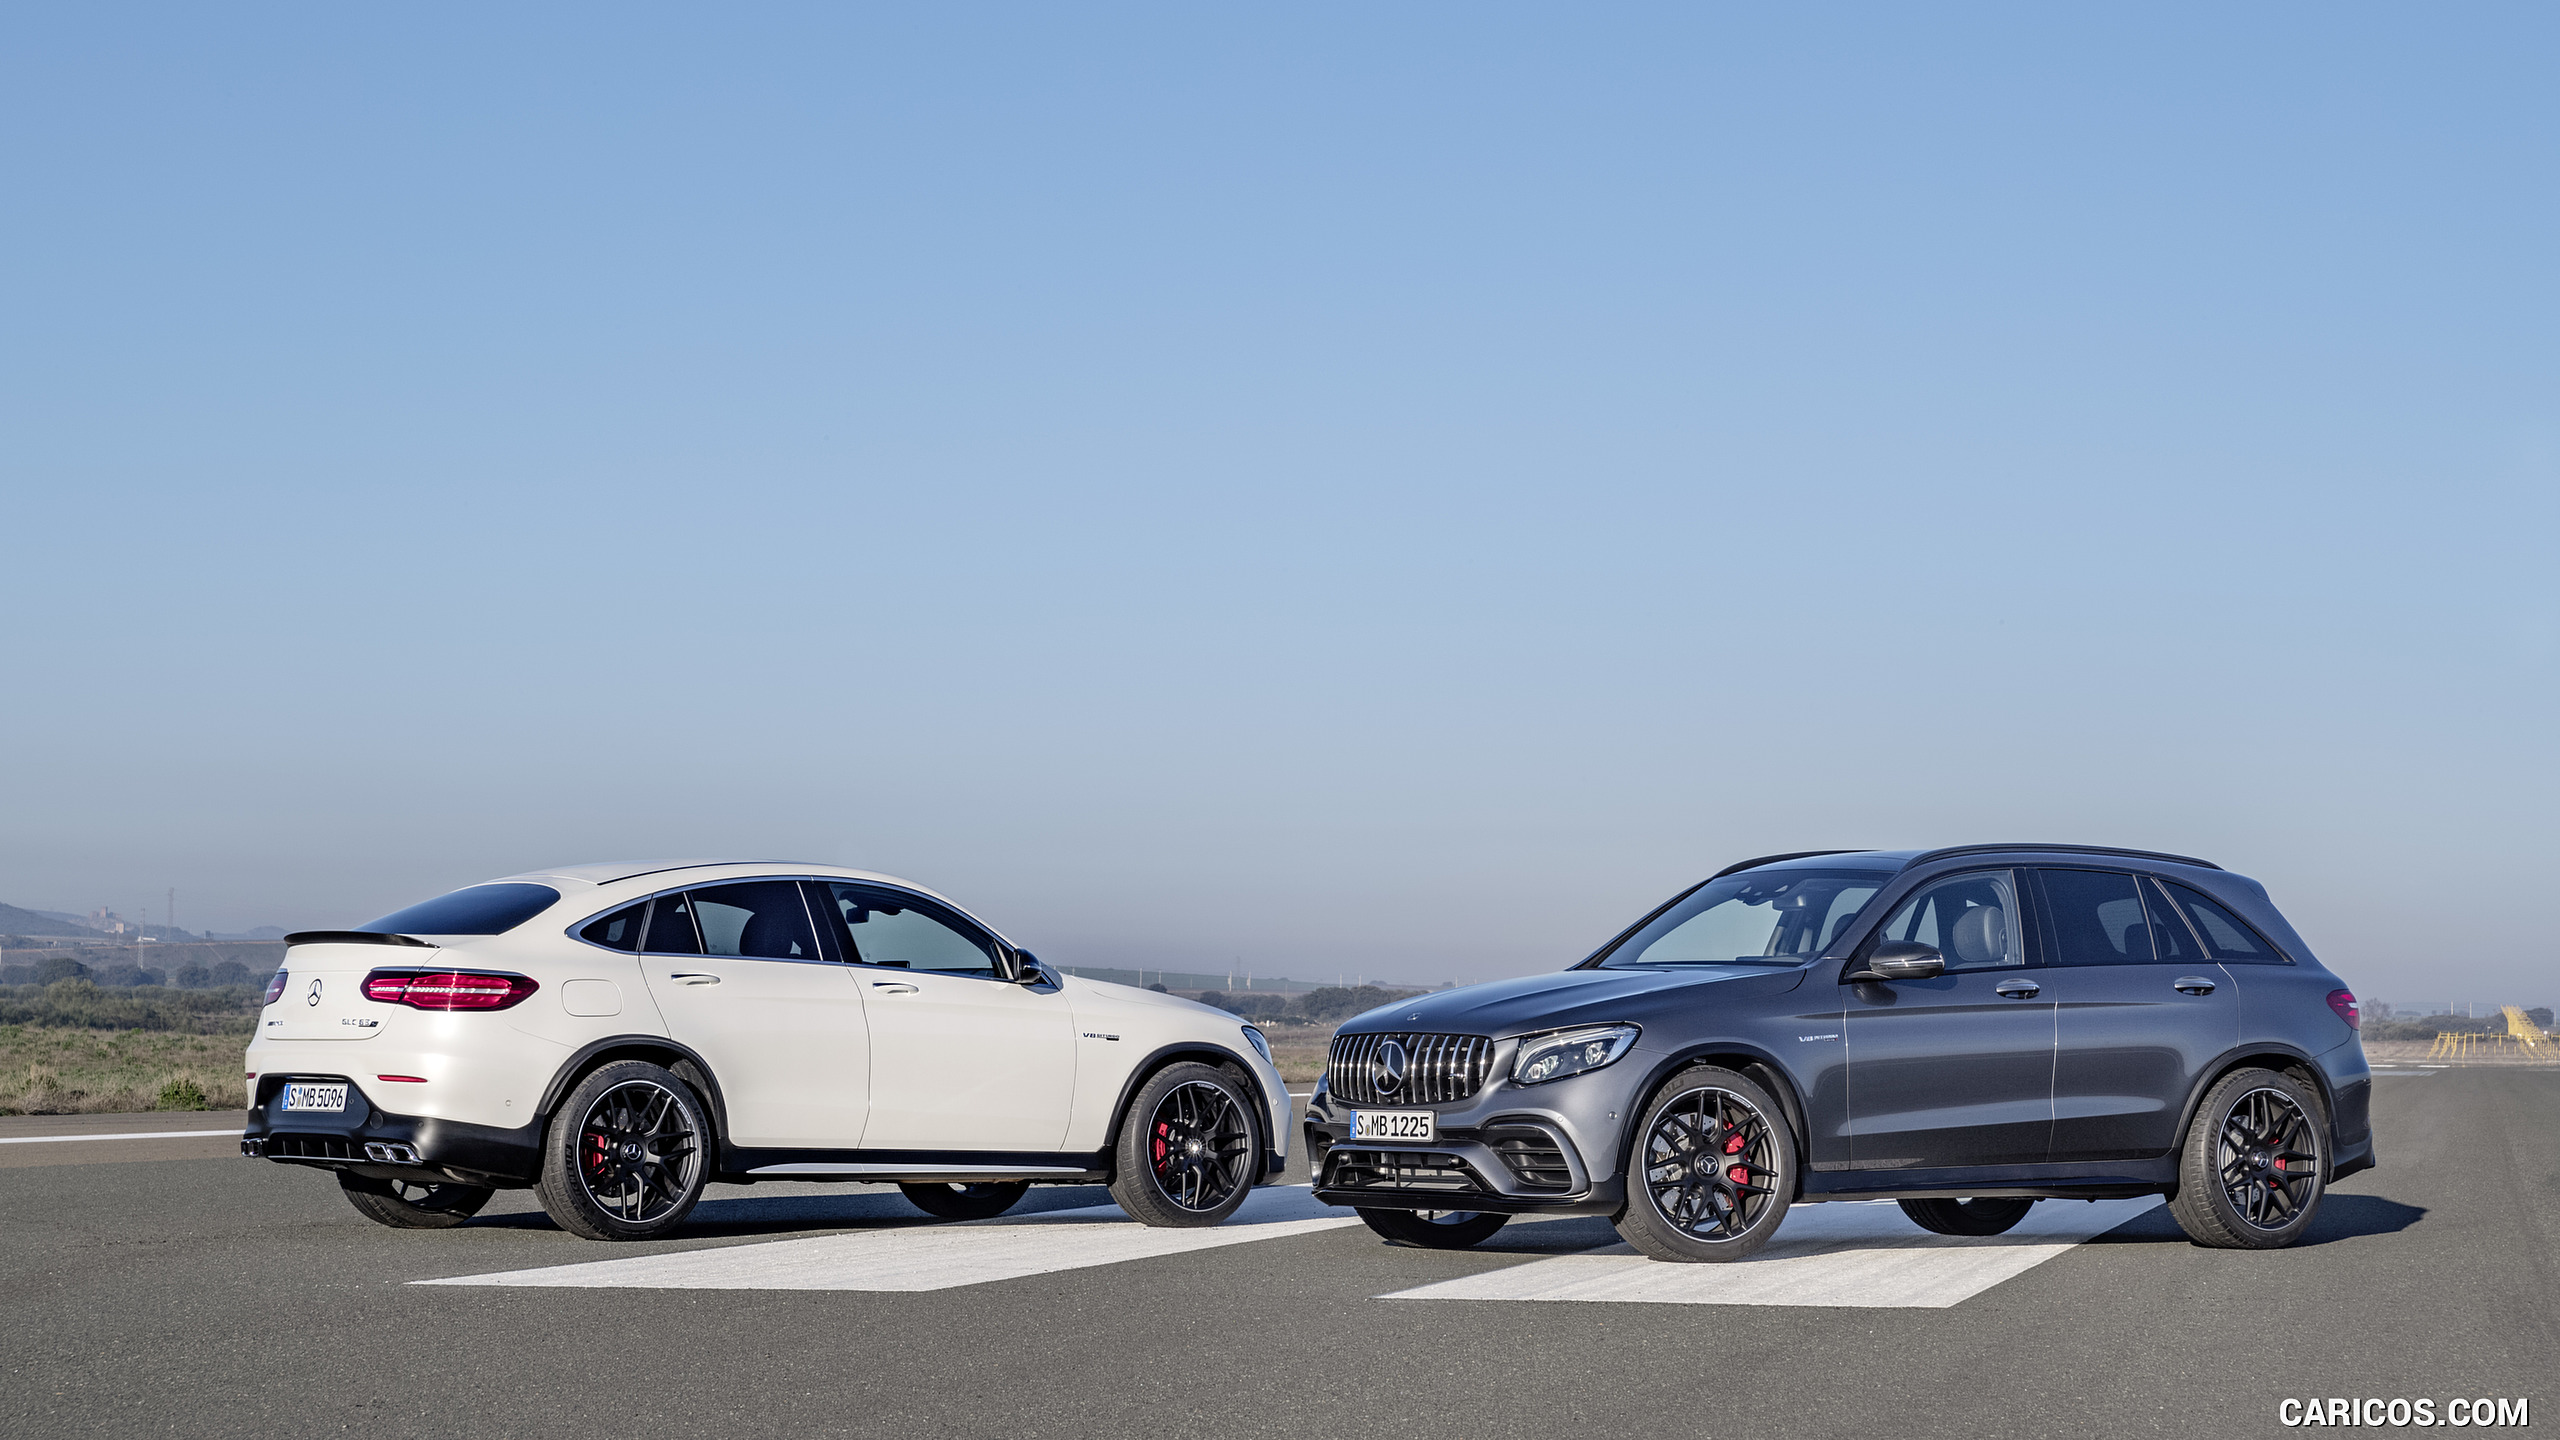 2018 Mercedes-AMG GLC 63 S 4MATIC+ (Color: Selenite Grey) and GLC 63 Coupe, #13 of 115